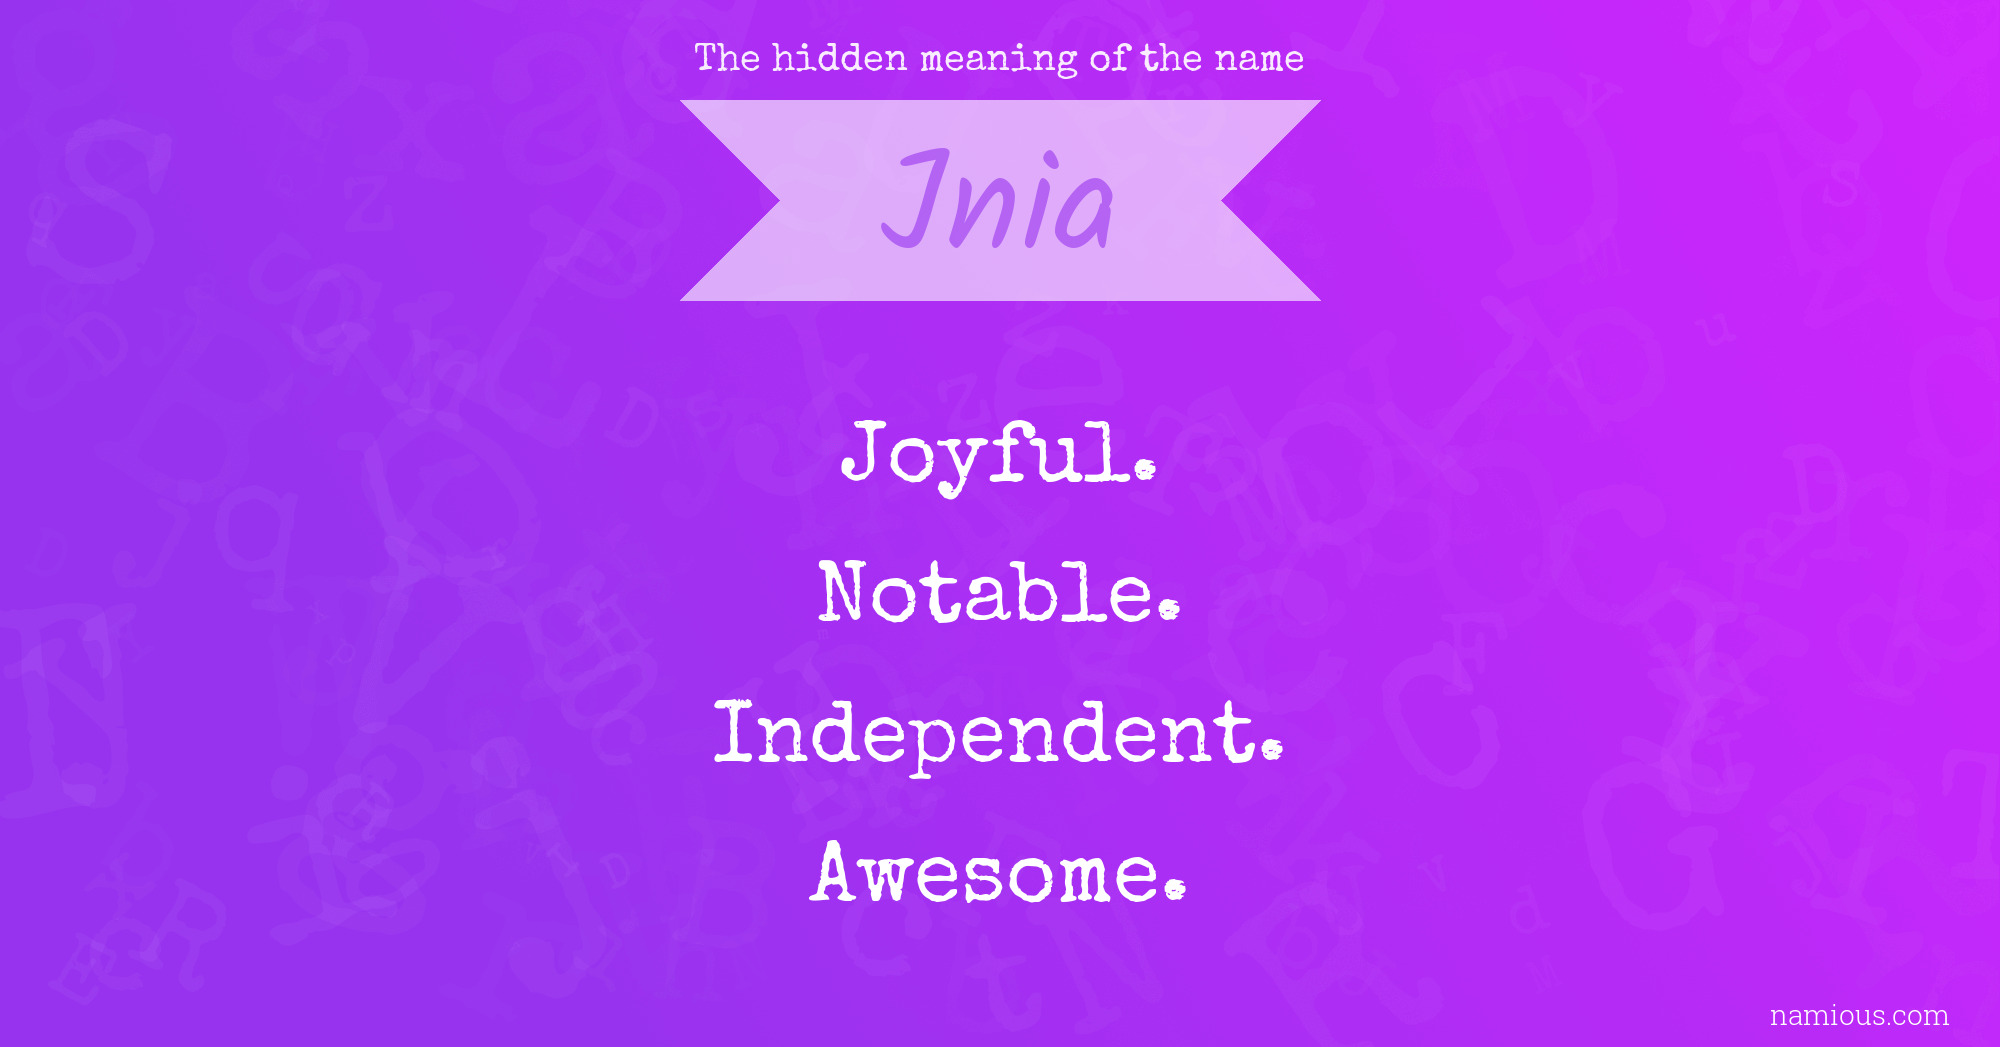 The hidden meaning of the name Jnia